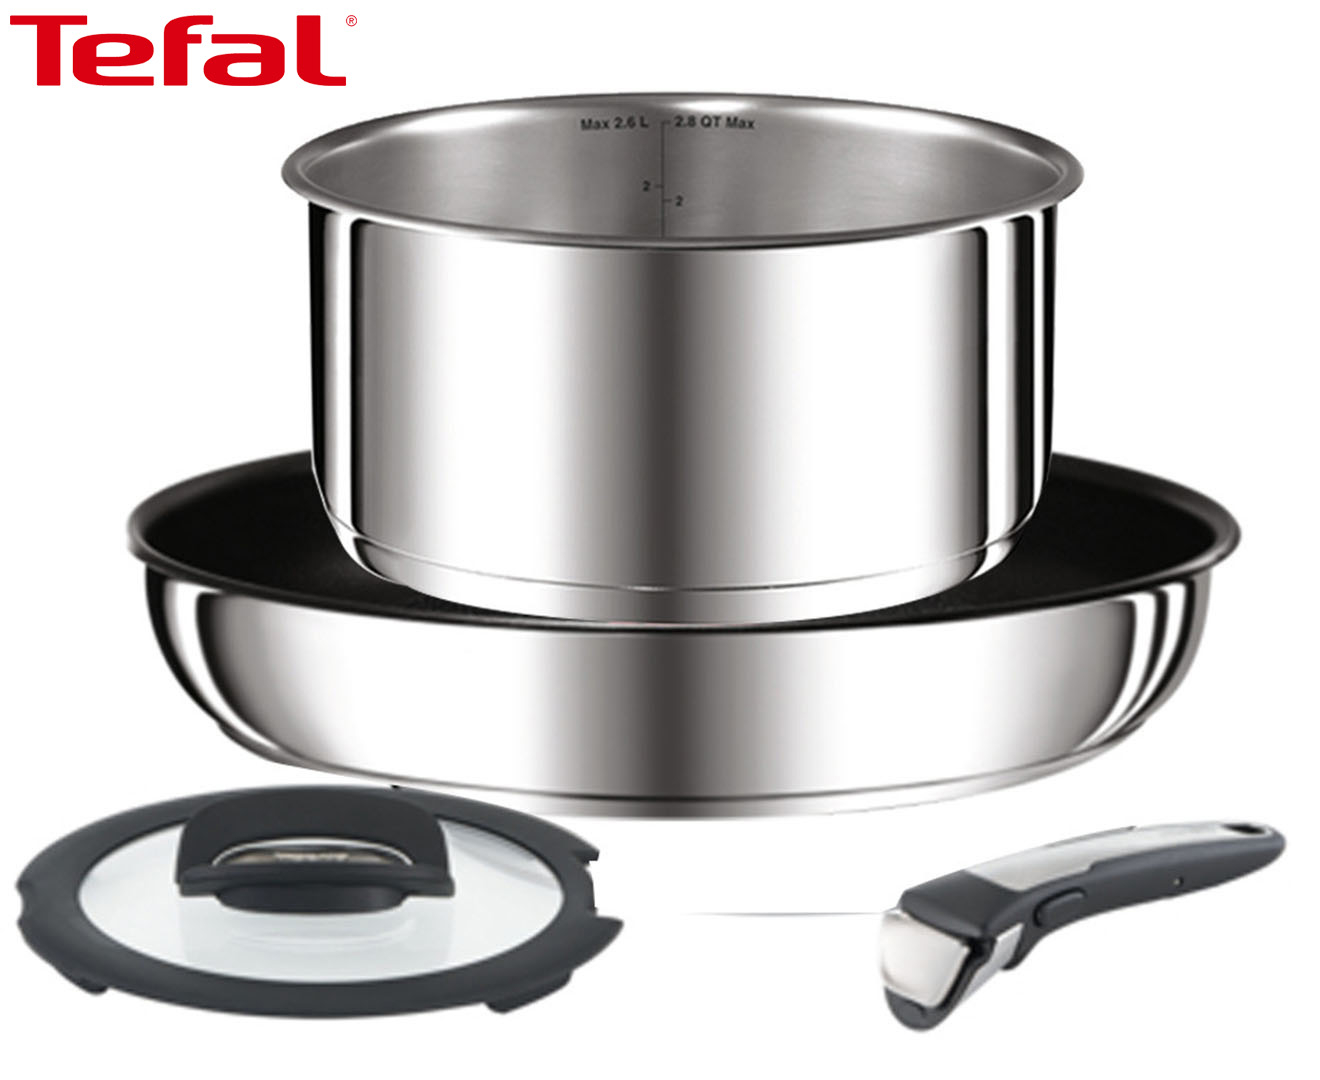 TEFAL Ingenio Preference Induction Stainless Steel 12-piece Set